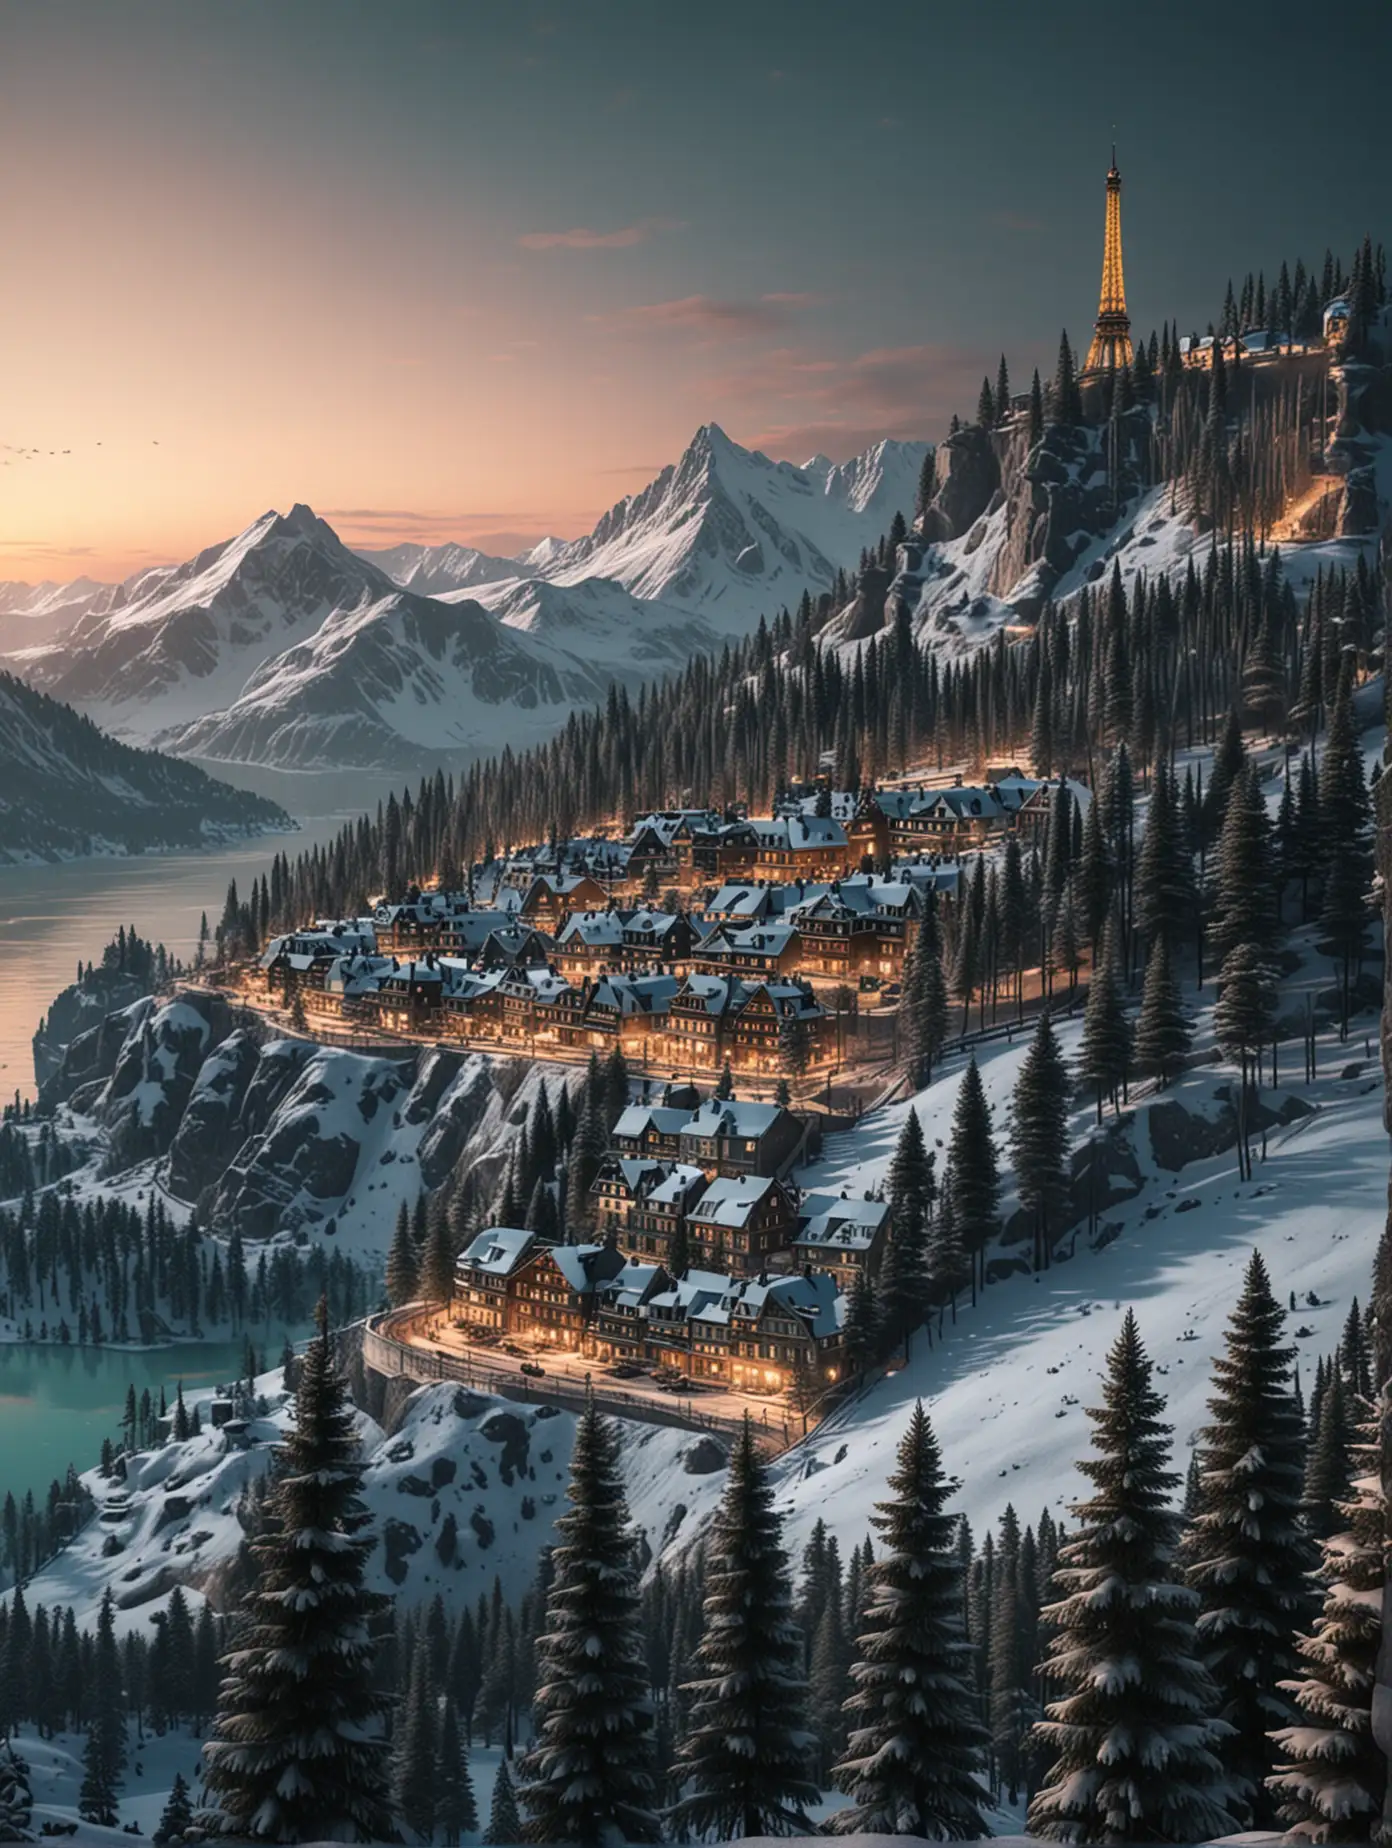 Create a part of a snow mountain with tall green pine trees, lighted houses from top to bottom of mountain, Eiffel Tower in distance, cyan lake at the bottom, sunset, very dark shades, photo realistic, HD quality